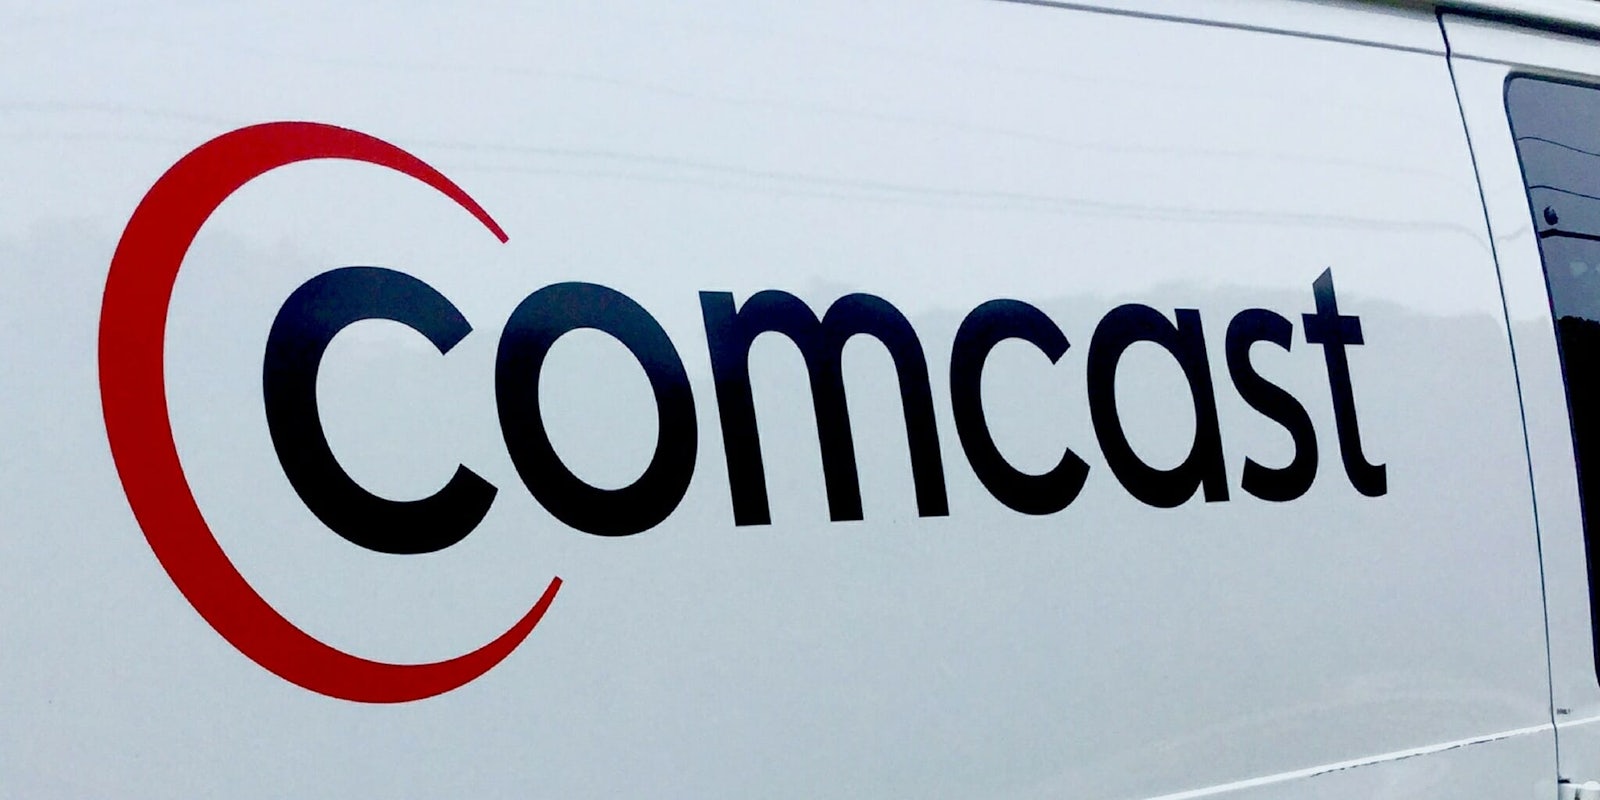 The Comcast logo on the side of a white van.